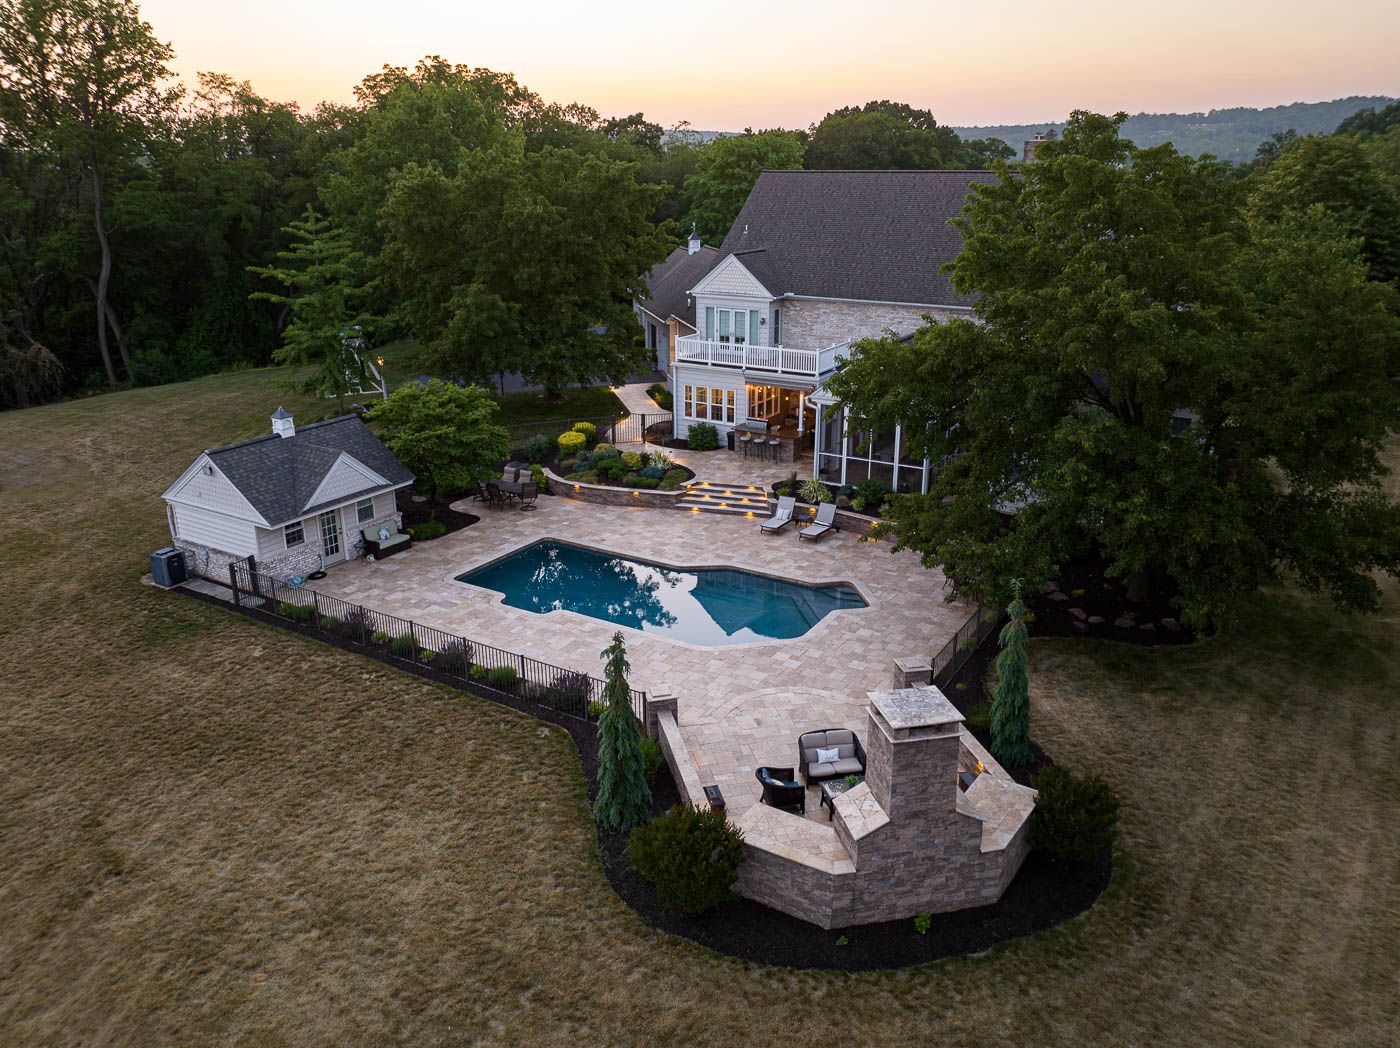 arial view of the paver patio around a pool with an outdoor fireplace